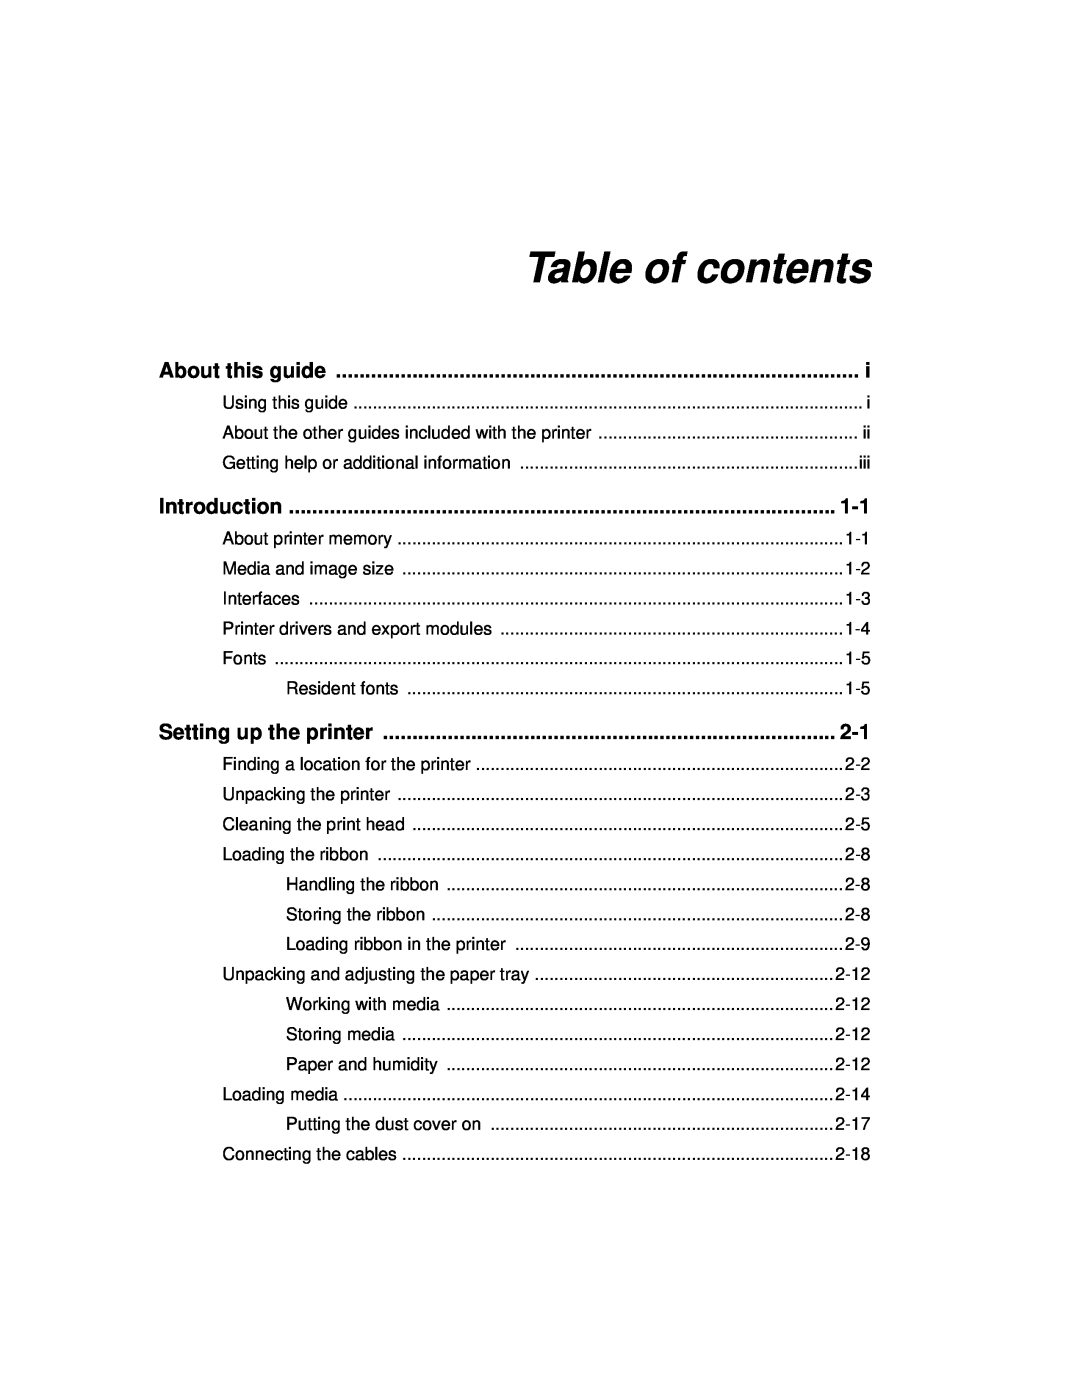 Kodak 8650 manual Table of contents, About this guide, Introduction, Setting up the printer 